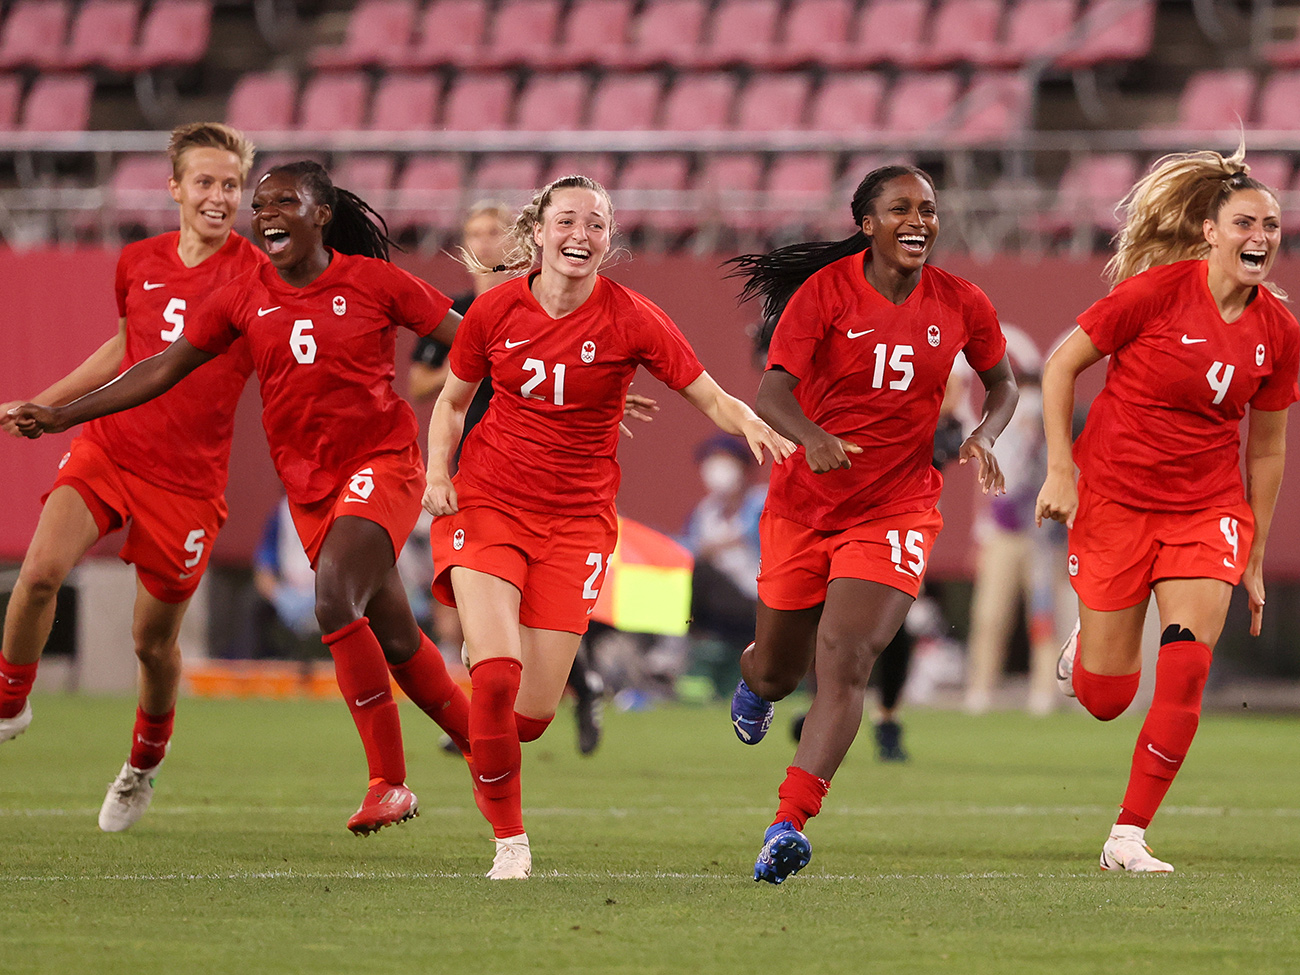 Canada Upsets US With 10 Win in Women's Soccer Bloomberg